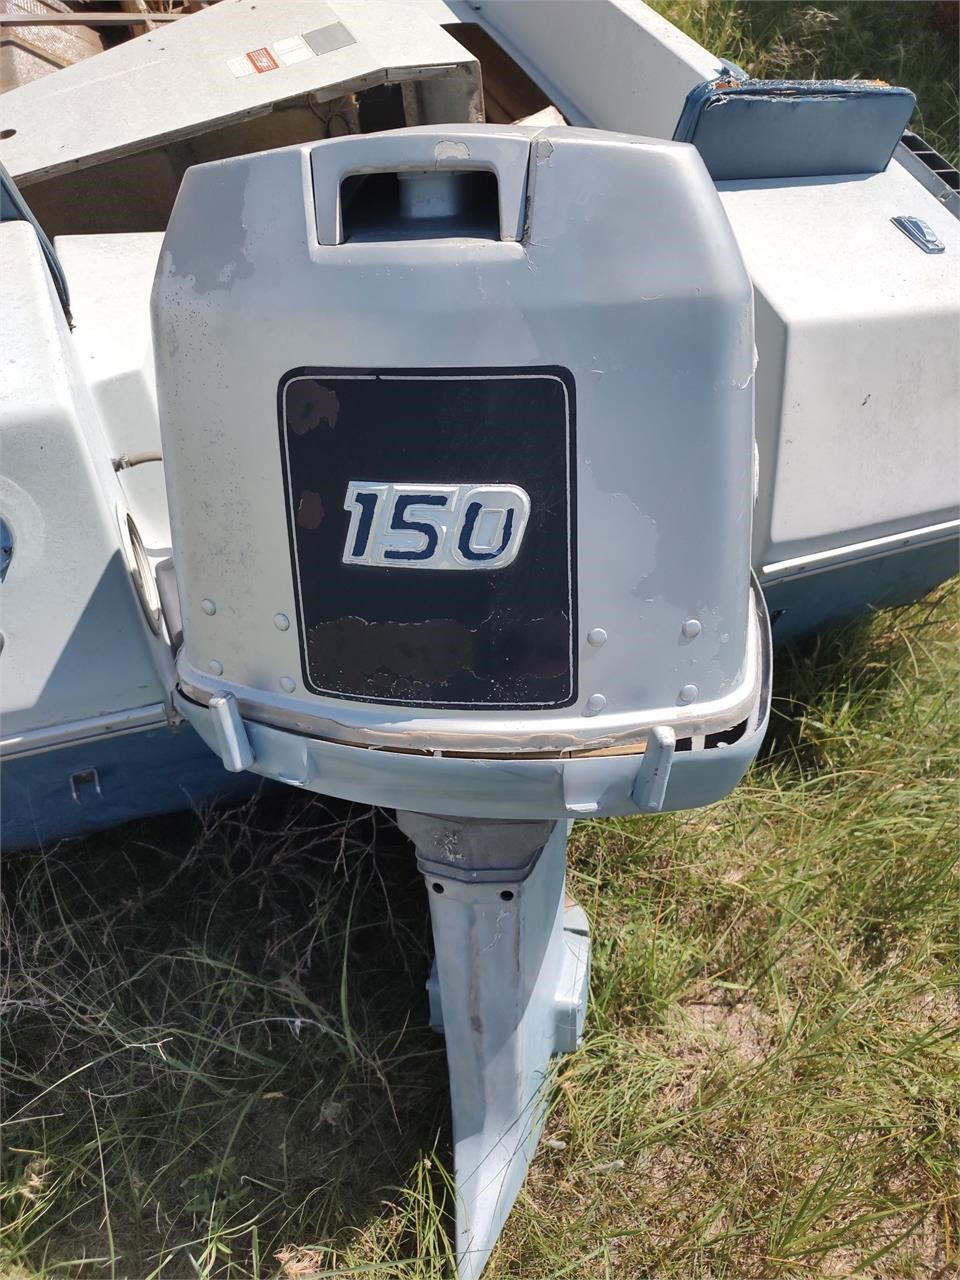 ENVINRUDE 150 OUTBOARD MOTOR ENGINE FOR PARTS ONLY